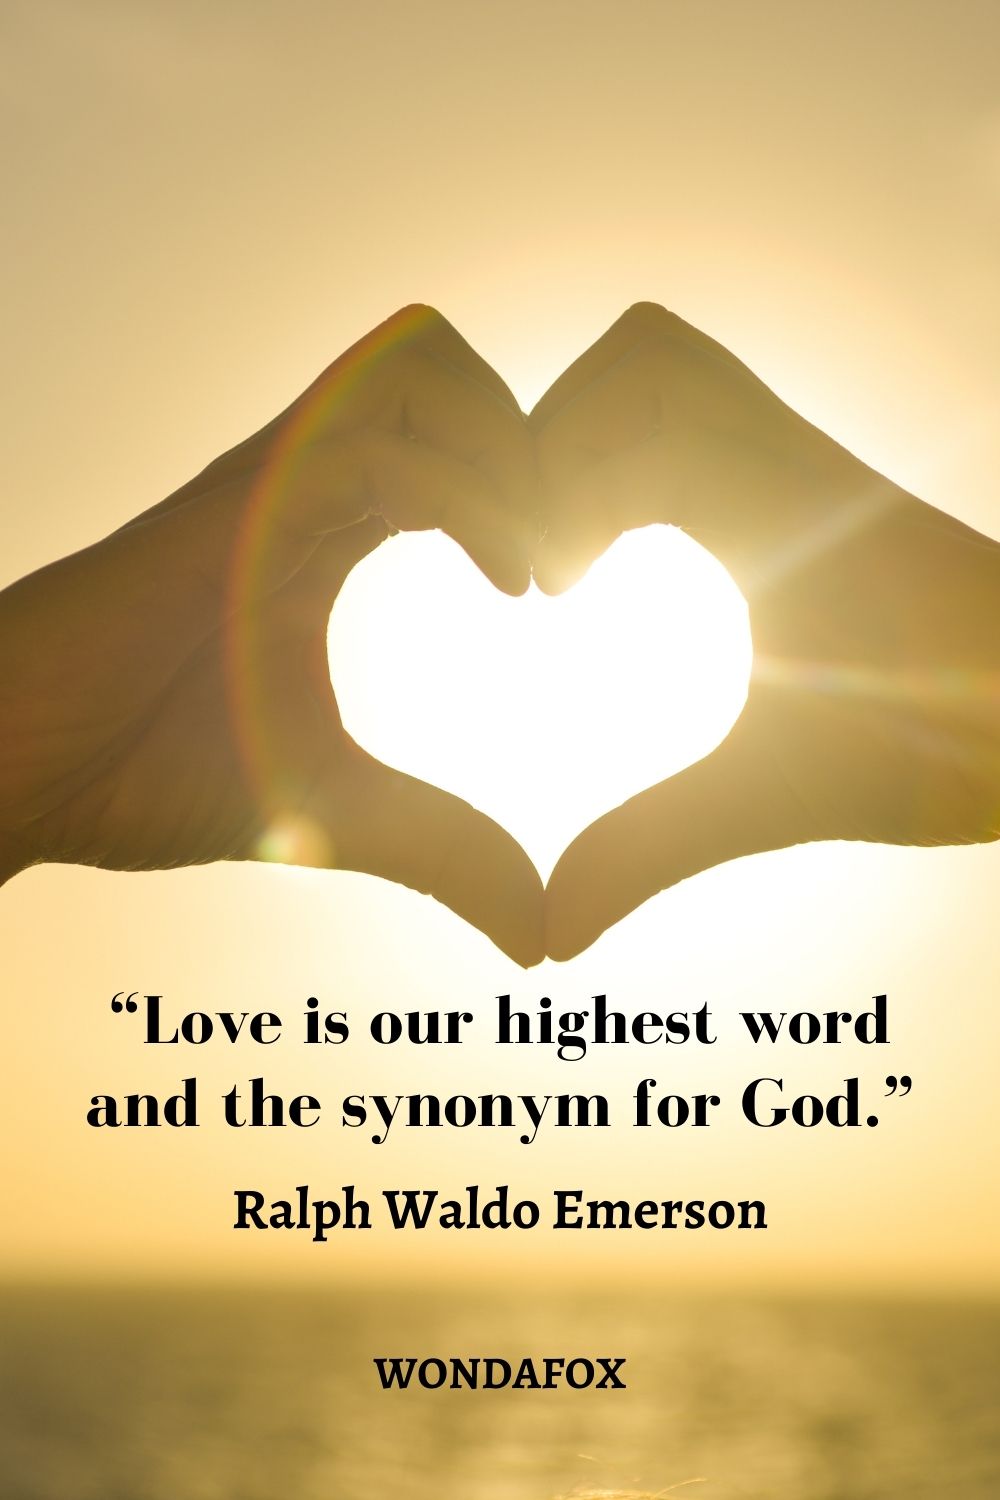  “Love is our highest word and the synonym for God.”
Ralph Waldo Emerson